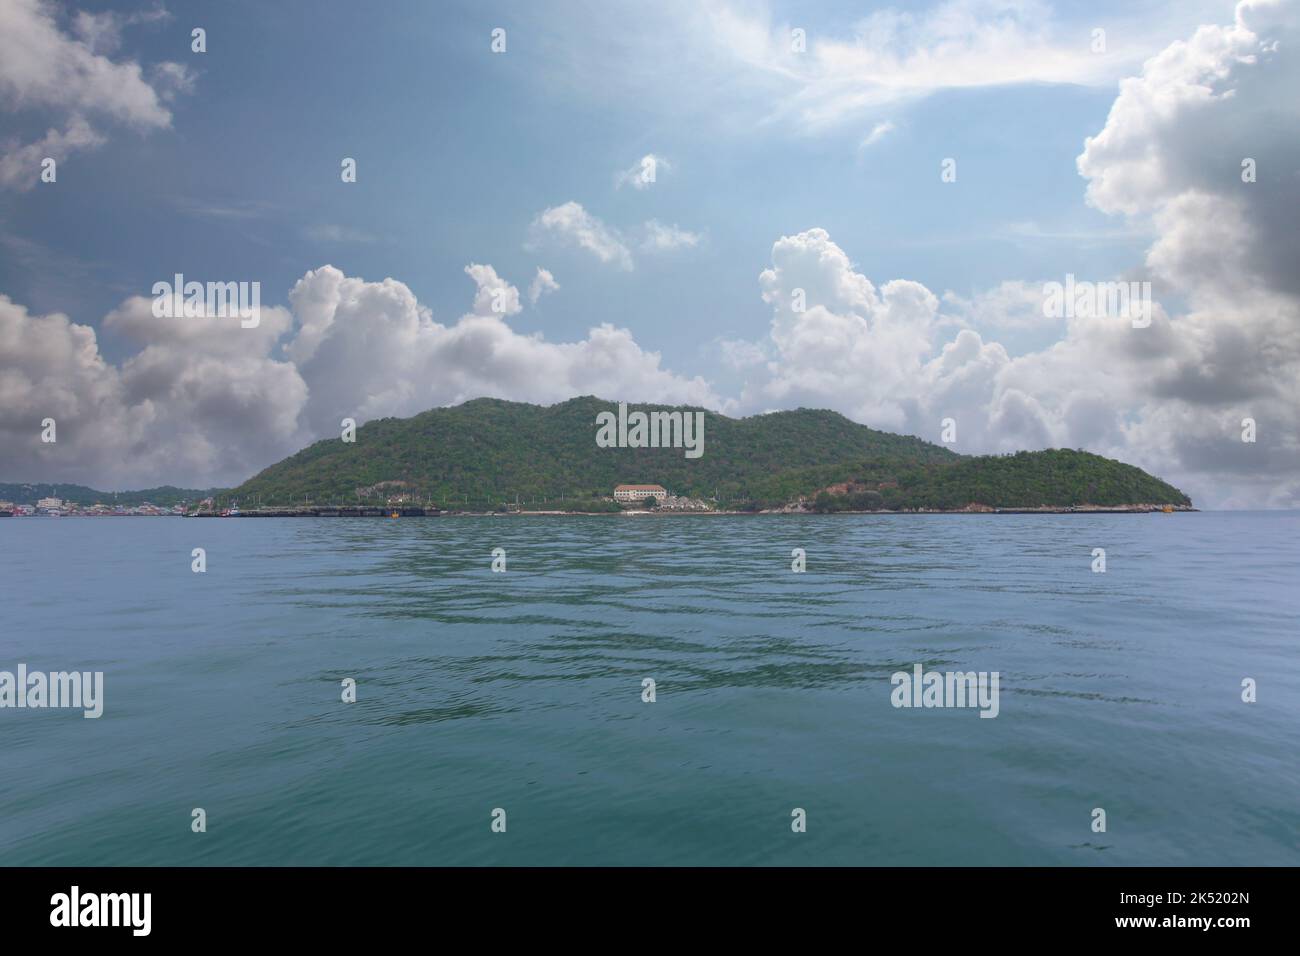 View of Koh Sichang, a popular tourist destination in Chonburi province, Thailand. Stock Photo